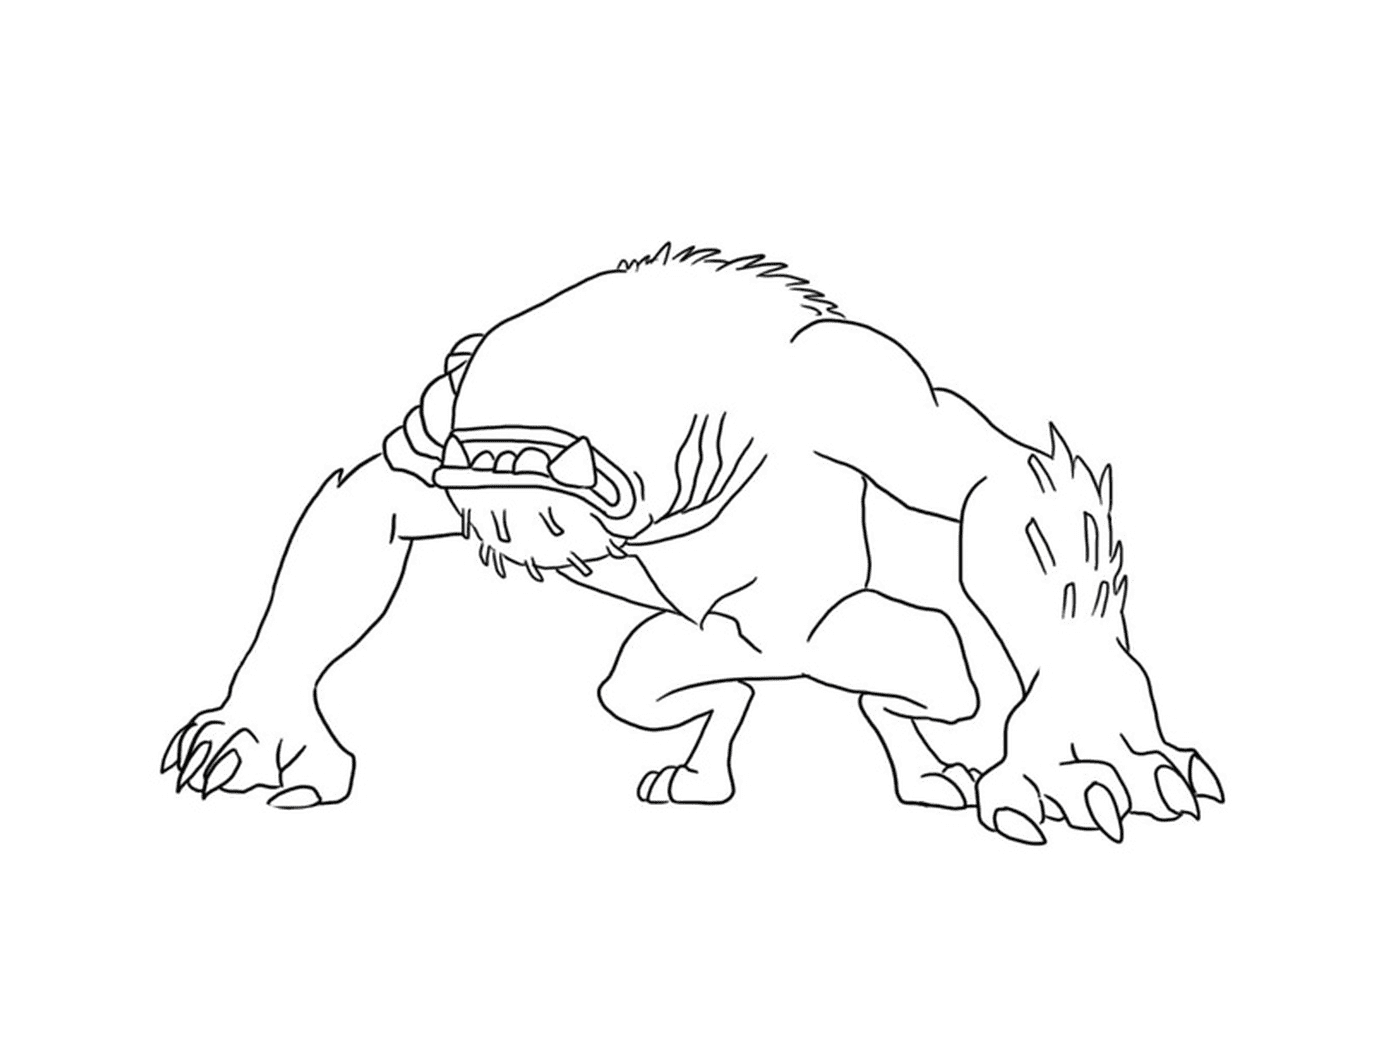  A werewolf in an online drawing style 